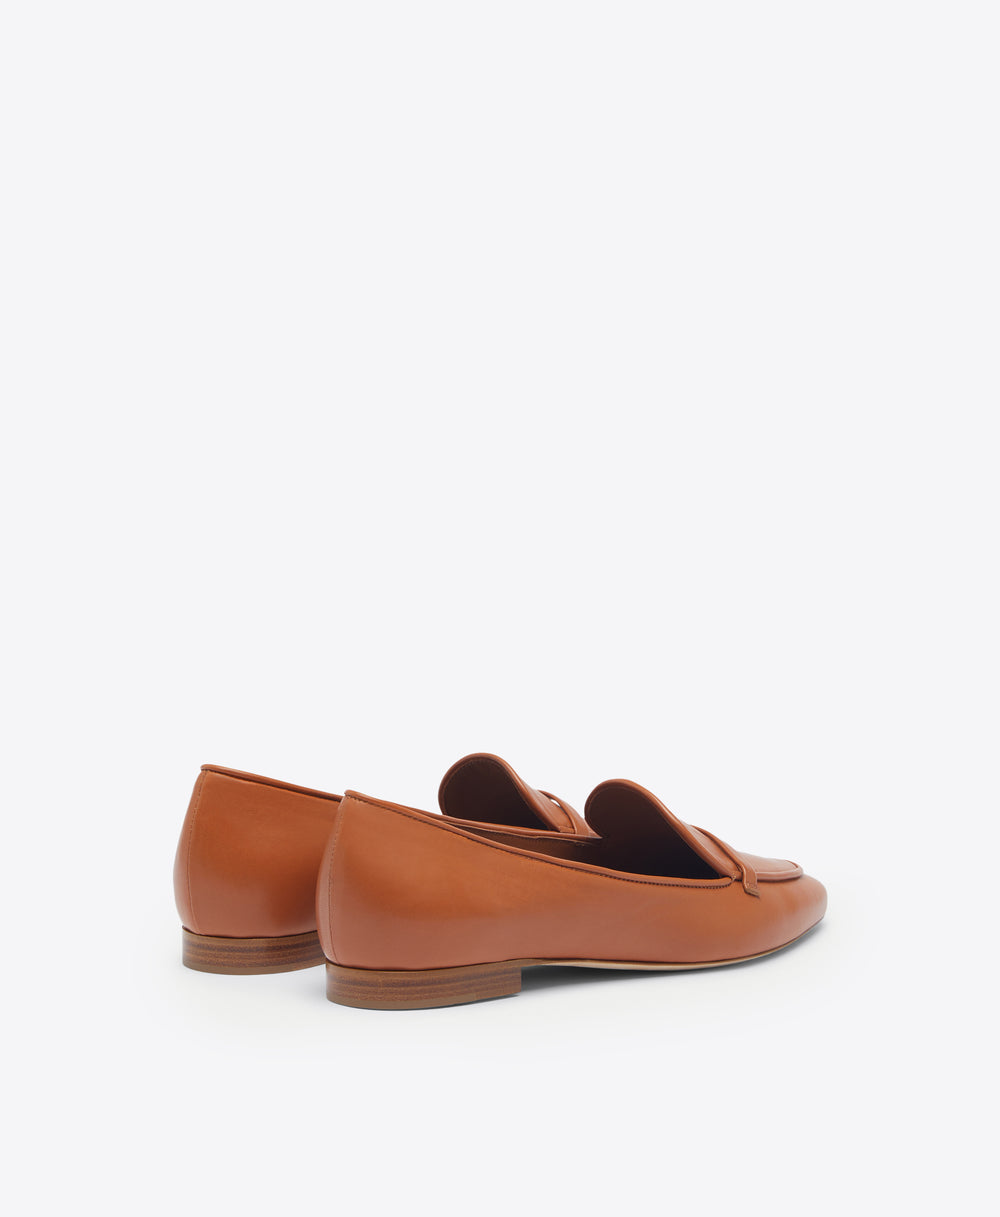 Malone Souliers Bruni Brown Leather Flat Loafers